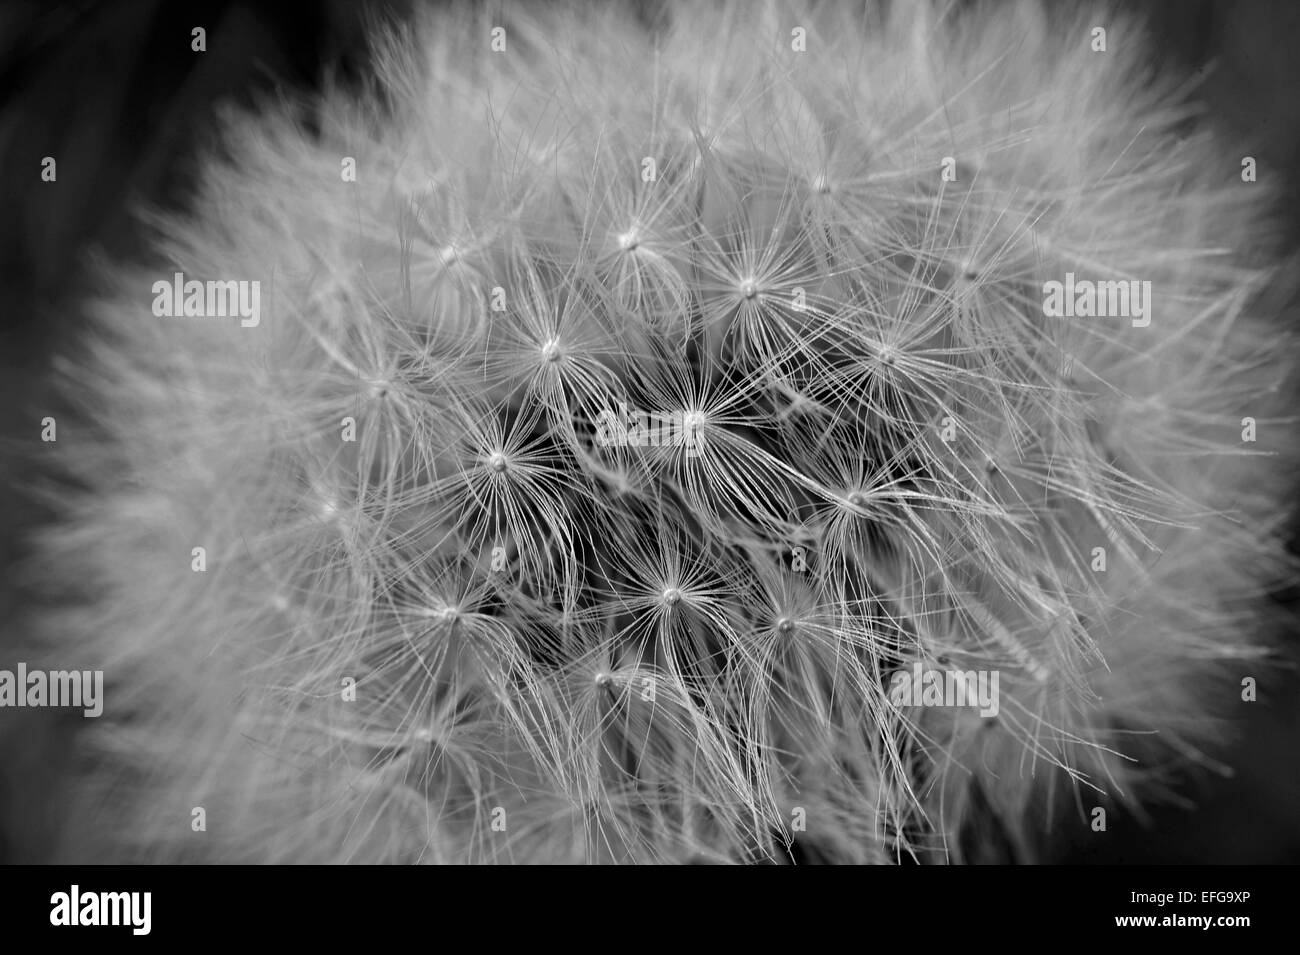 Macro close-up of full dandelion seed head in black and white Stock Photo